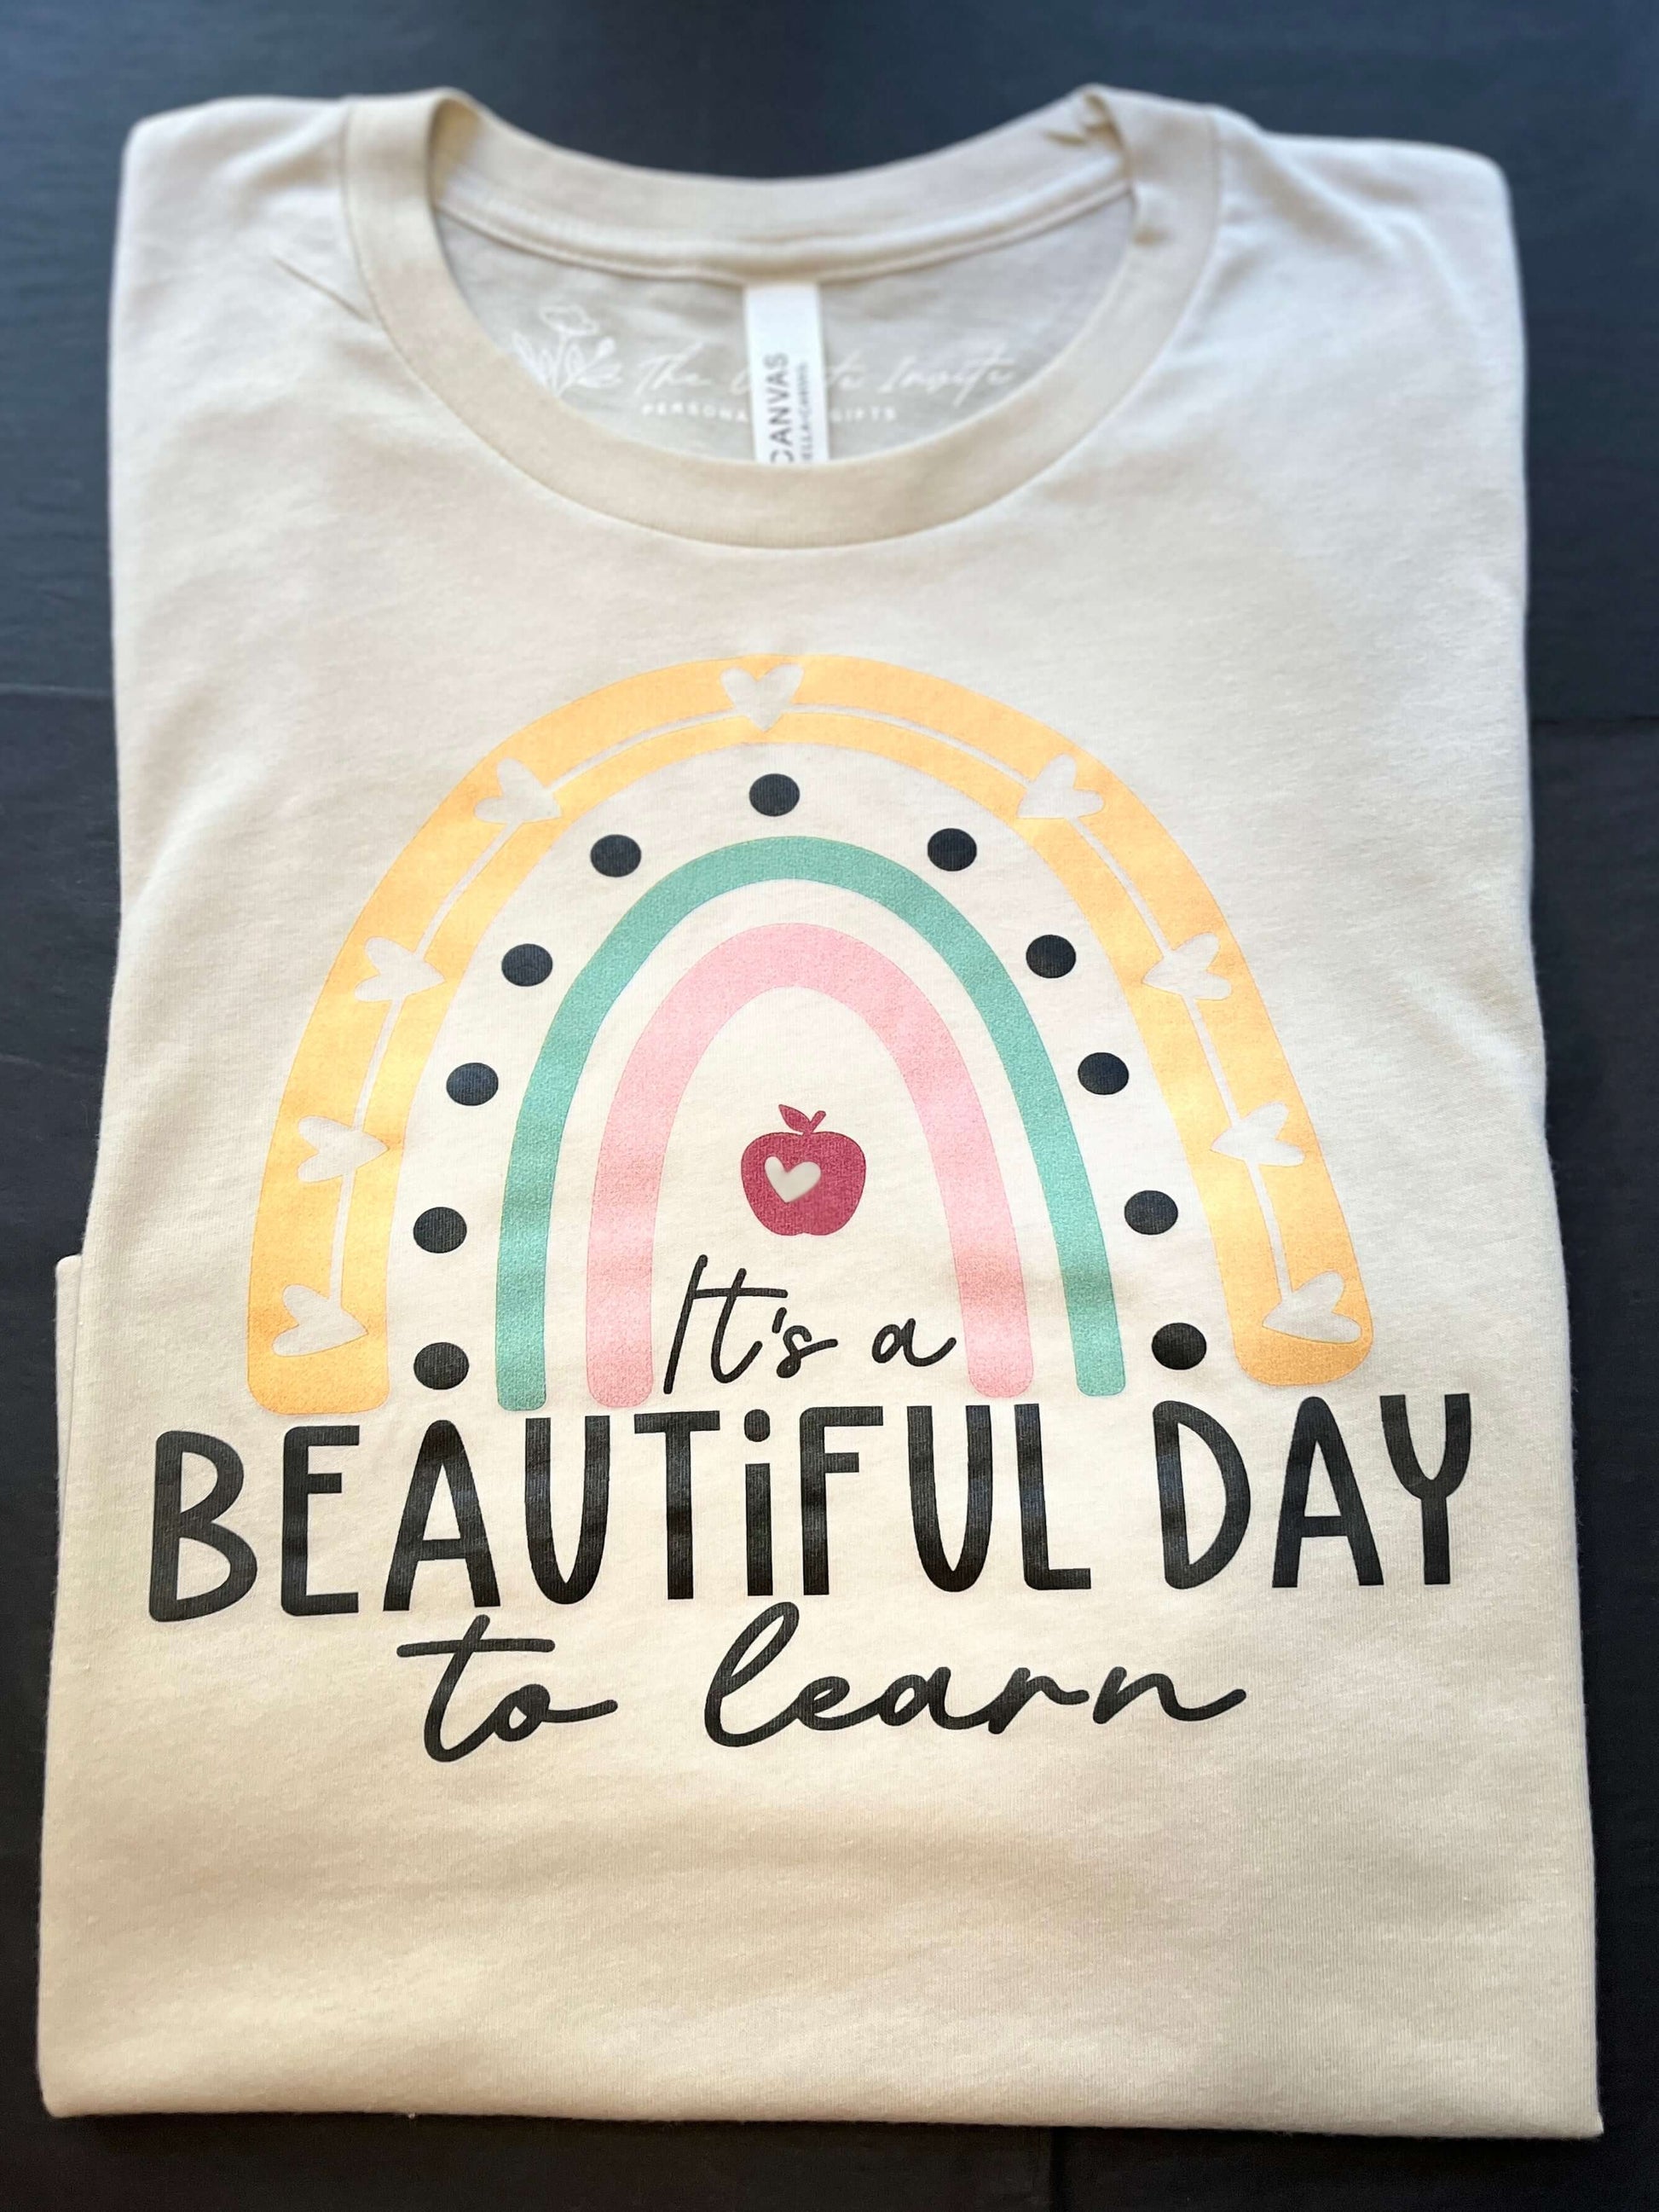 Shirt & Tops bella canvas, Bella Canvas tee, clothing, gift, gift corner, gift list, gifts, graphic, graphic tee, Graphic Tees, shirts & Topsgraphic tees, teacher gift ideas, teacher gifts, teacher graphic tee, the gift corner Size: Small, Medium, Large,